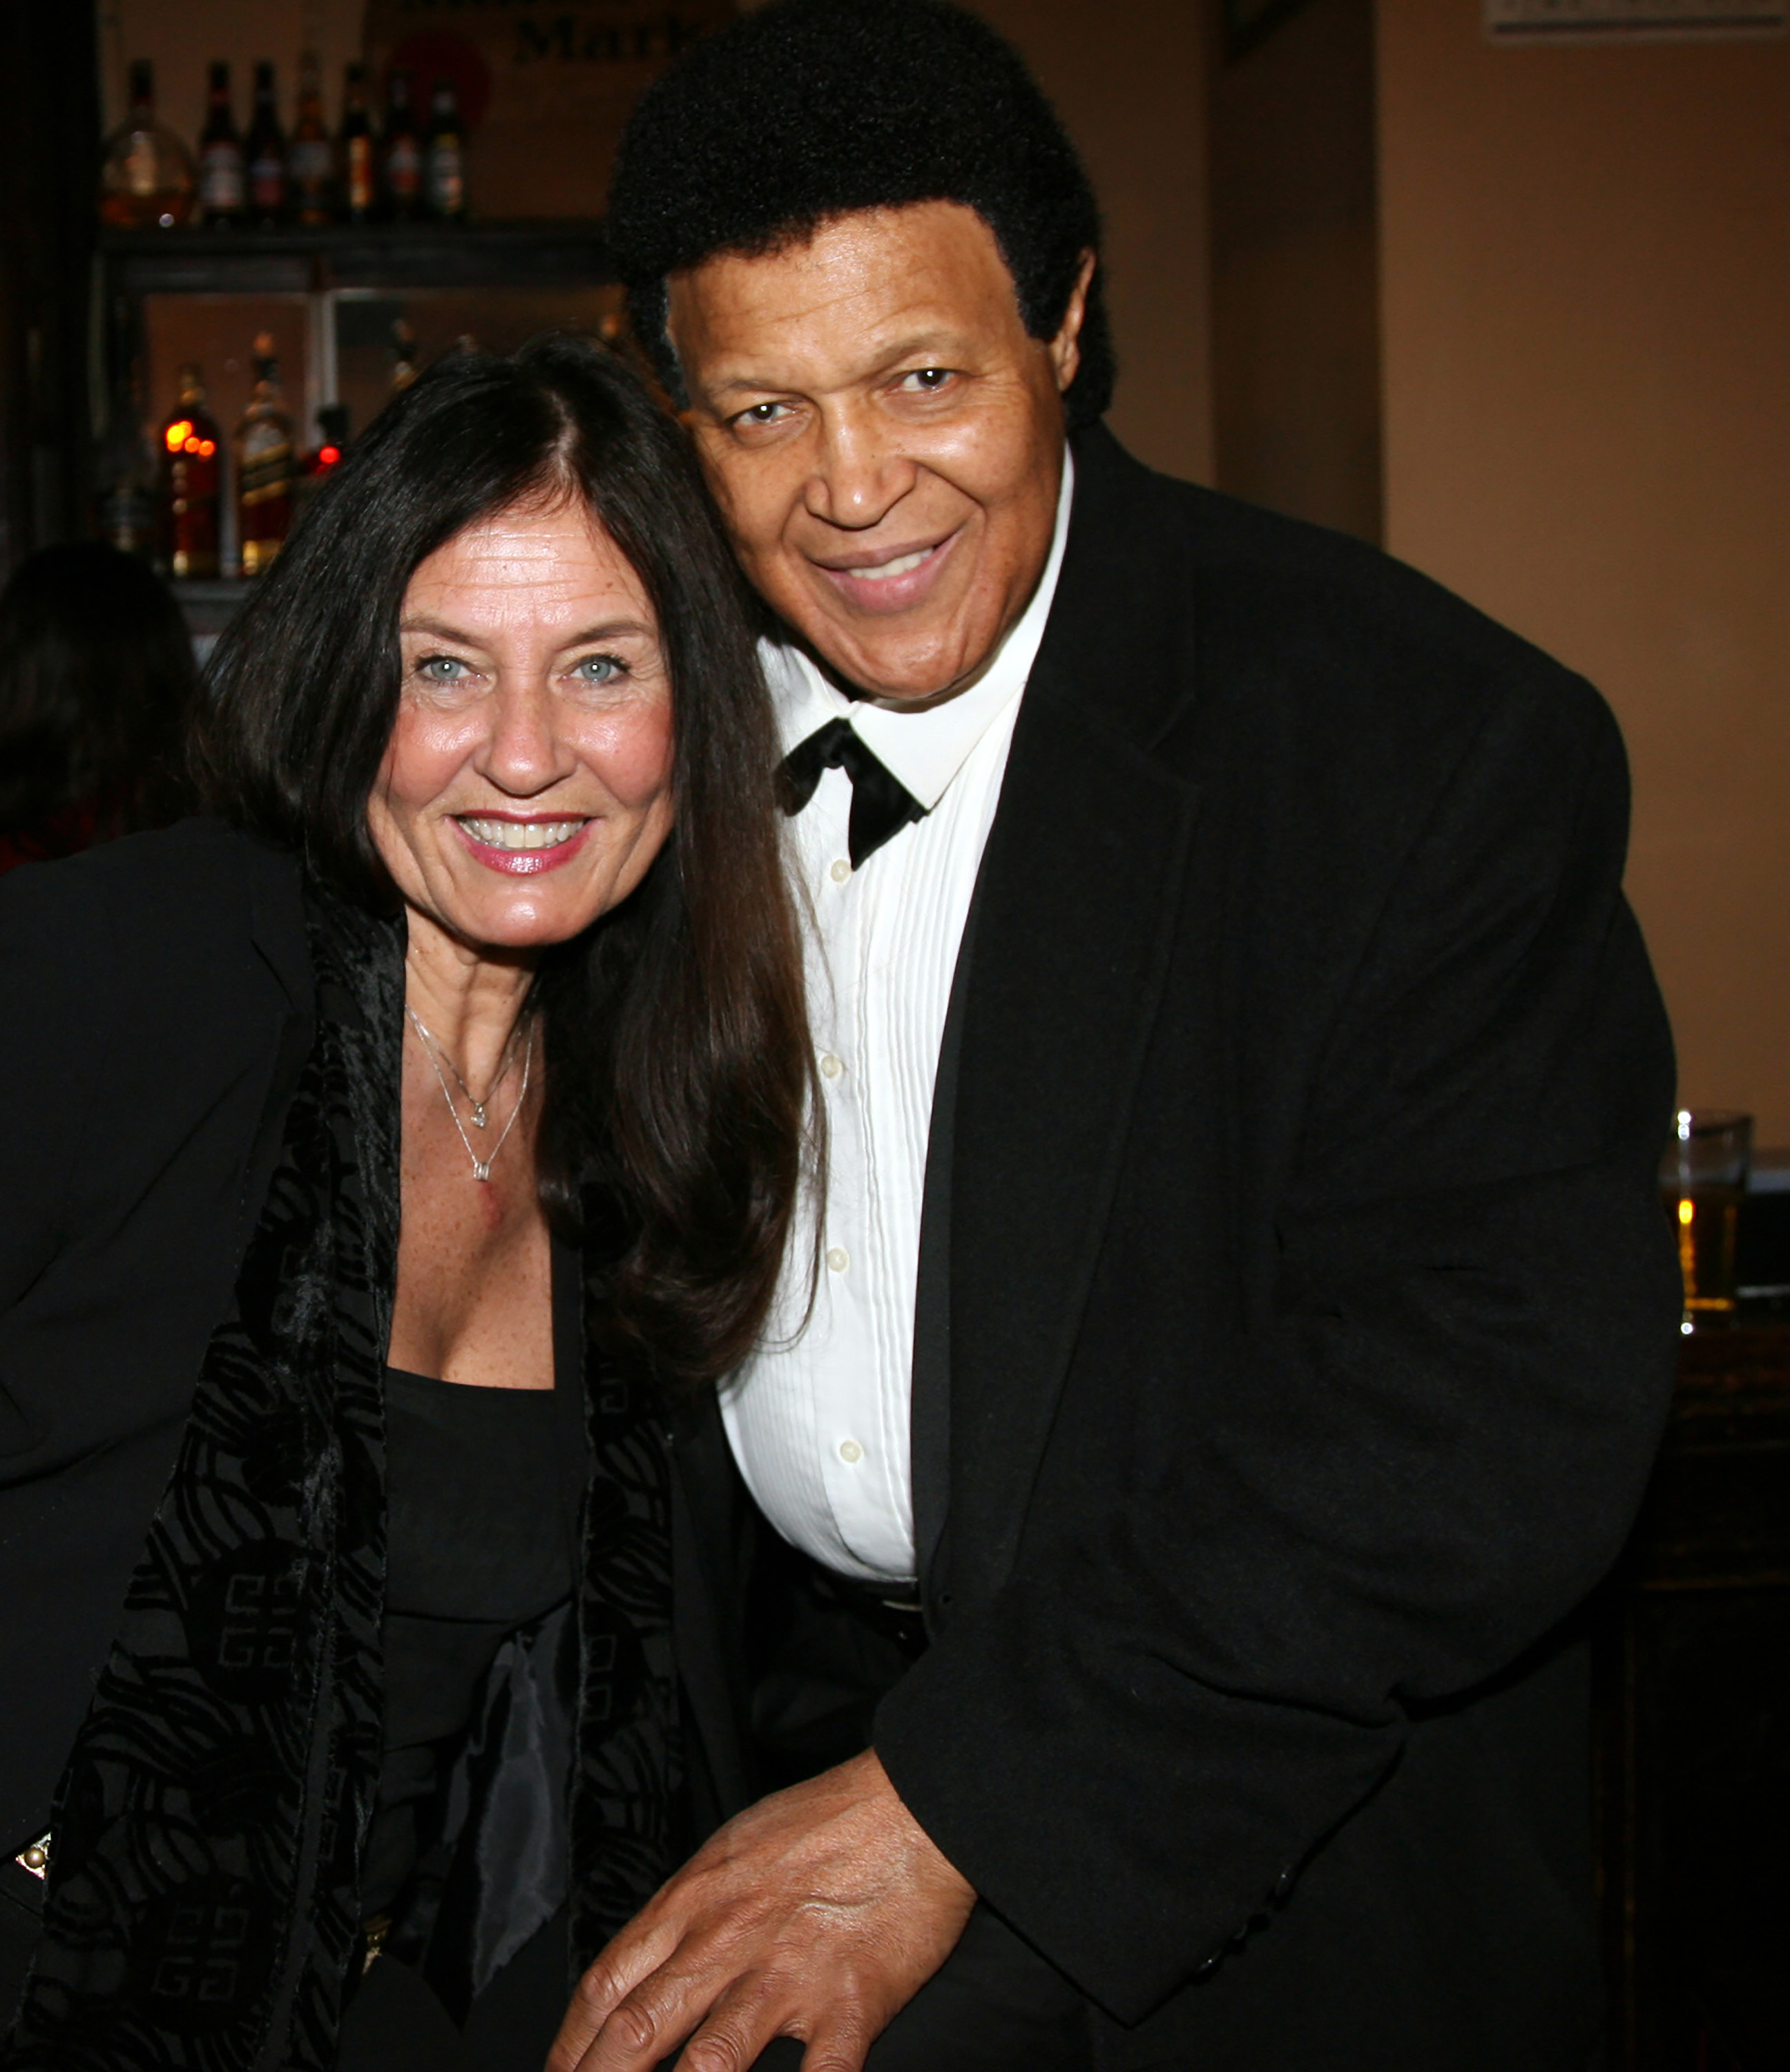 Catharina Lodders and Chubby Checker during his concert at The Cutting Room on March 6, 2008, in New York City. | Source: Getty Images